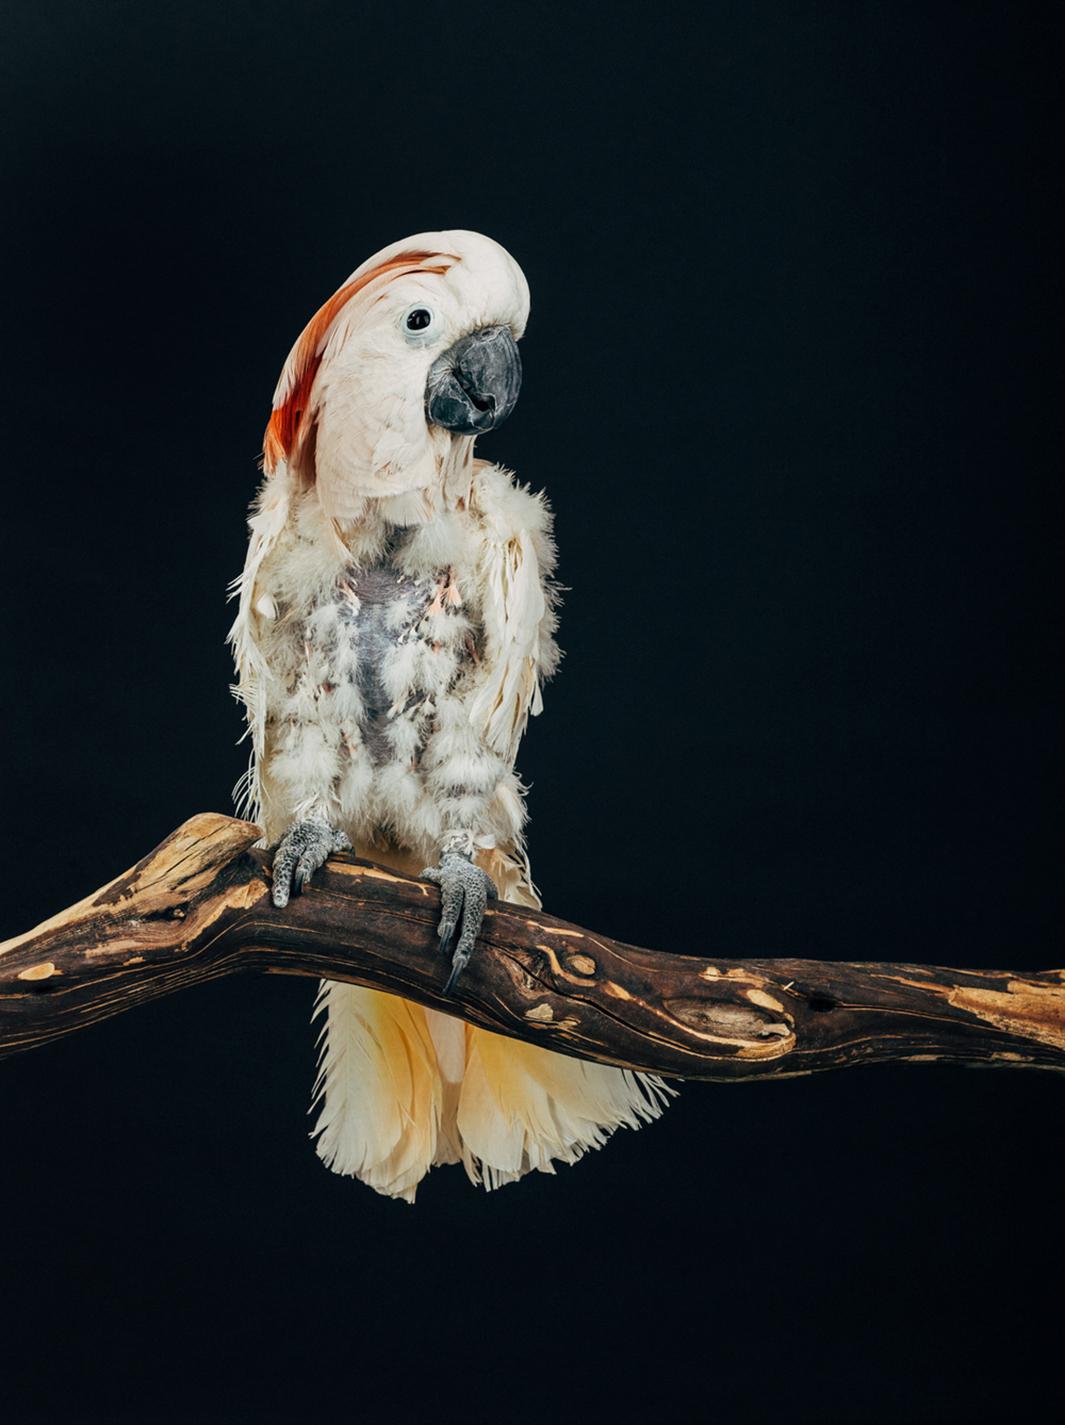 portraits Regueiro: Oliver of in sanctuaries a of series sheltered exotic Earthbound birds is